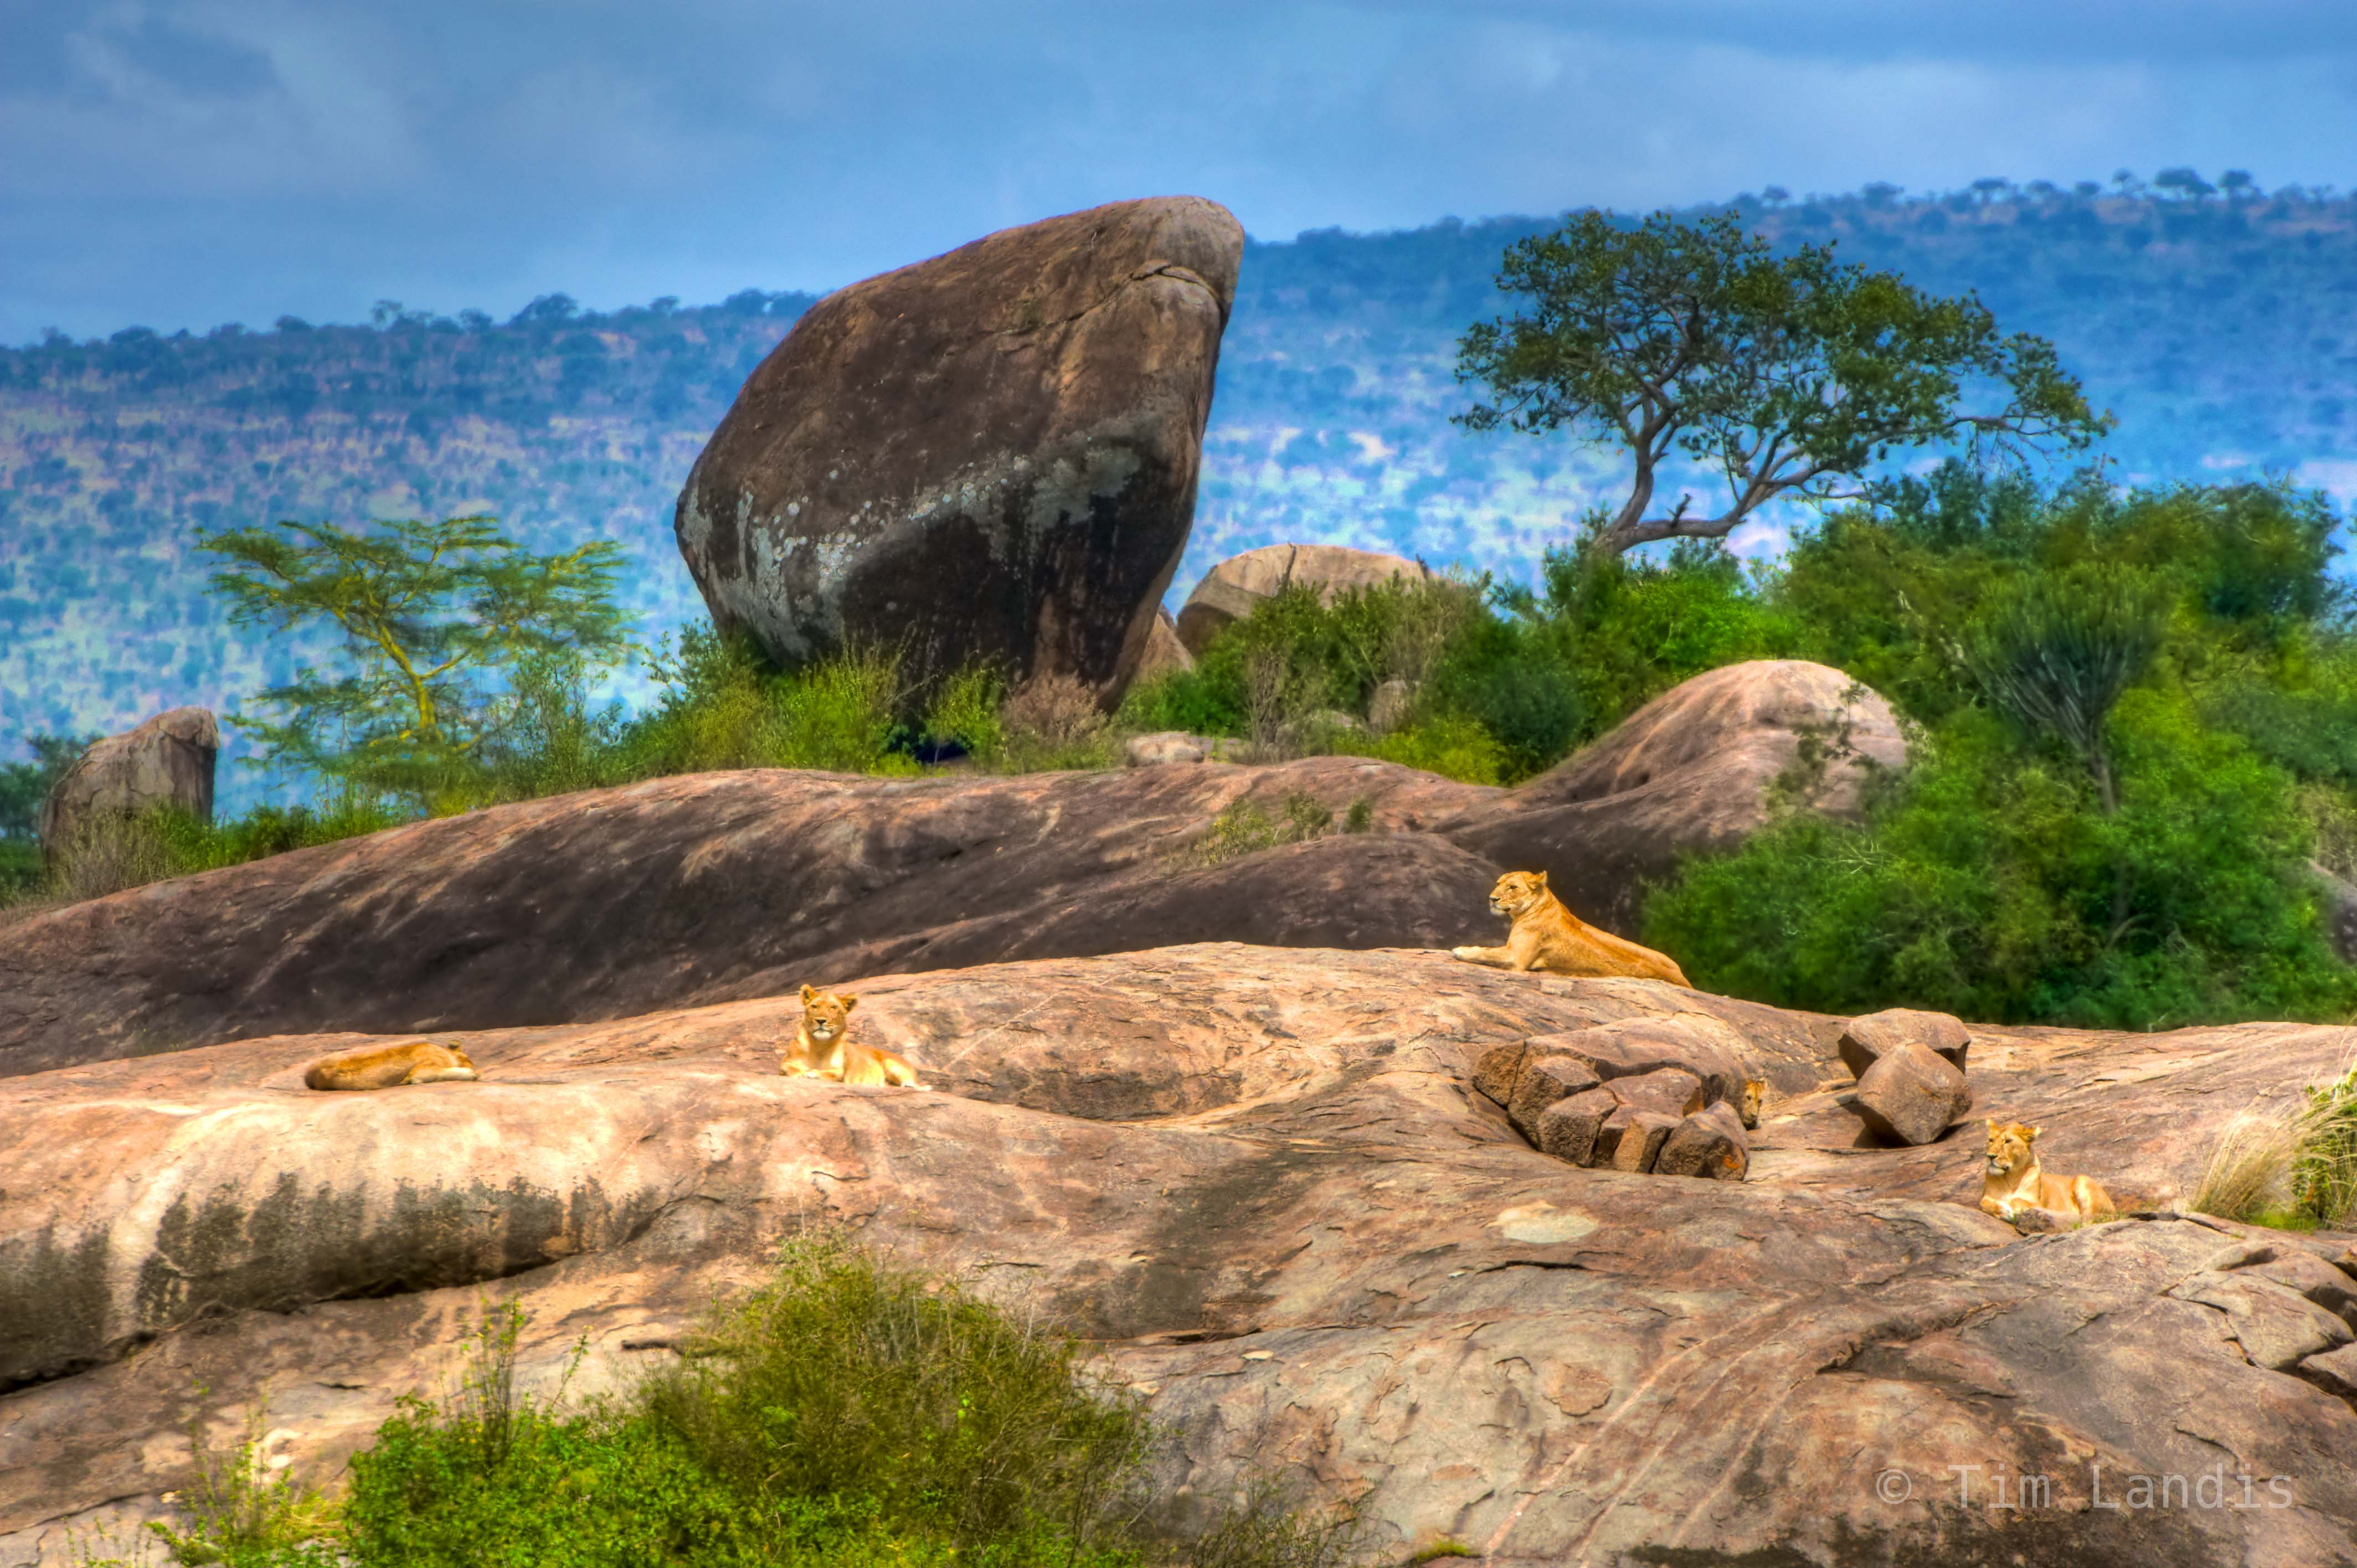 A pride of lions relax in the sun on a massive granite outcropping